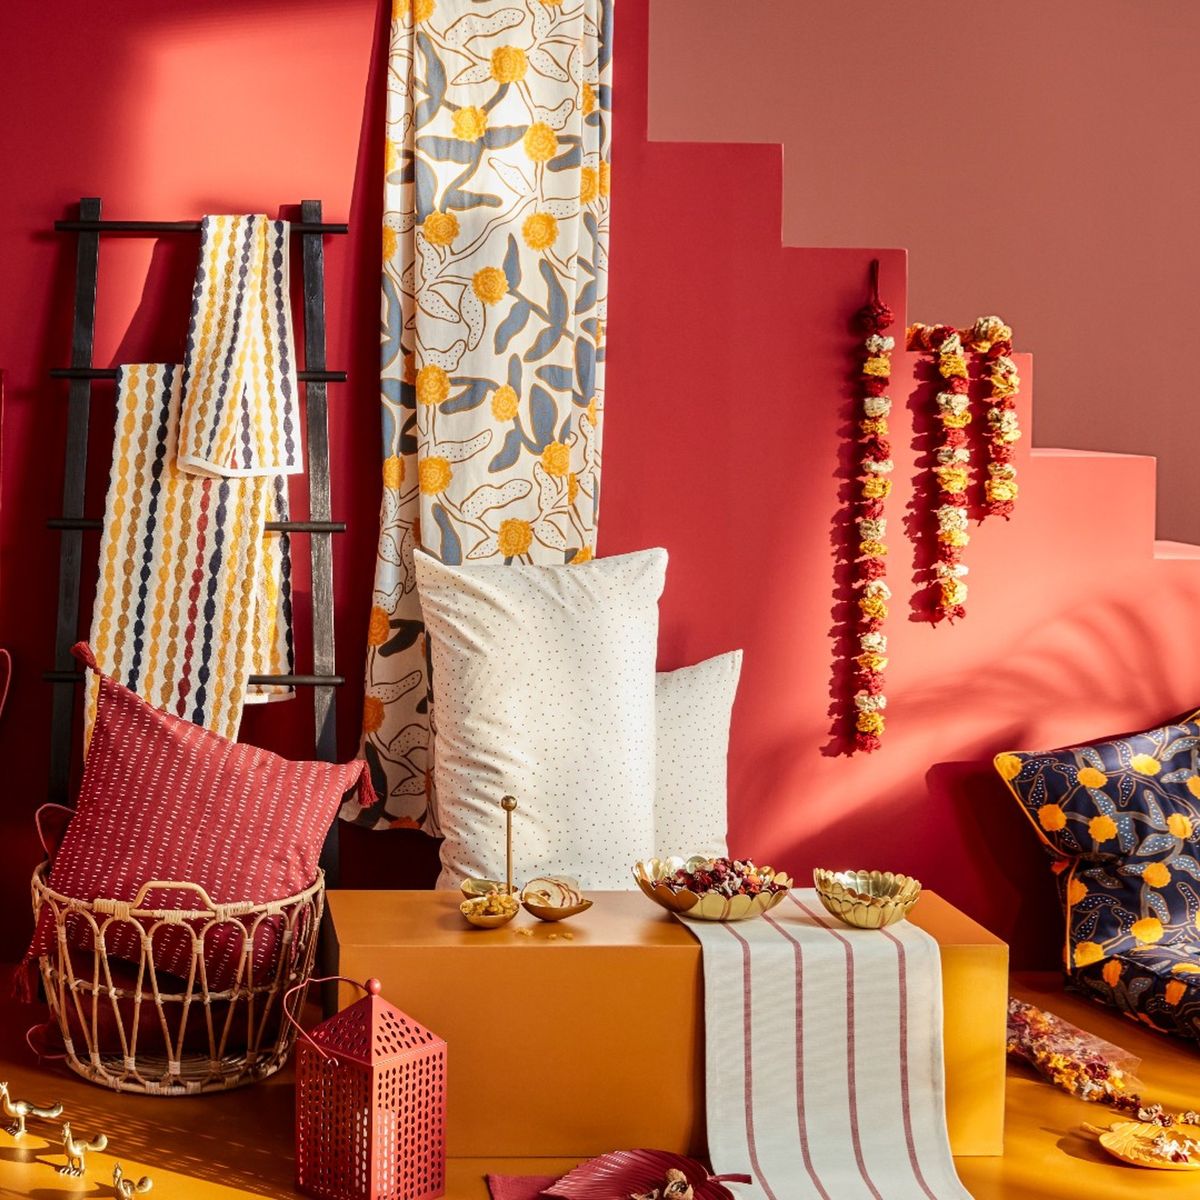 IKEA’s new Diwali-inspired collection is a stunning celebration of patterns and colours